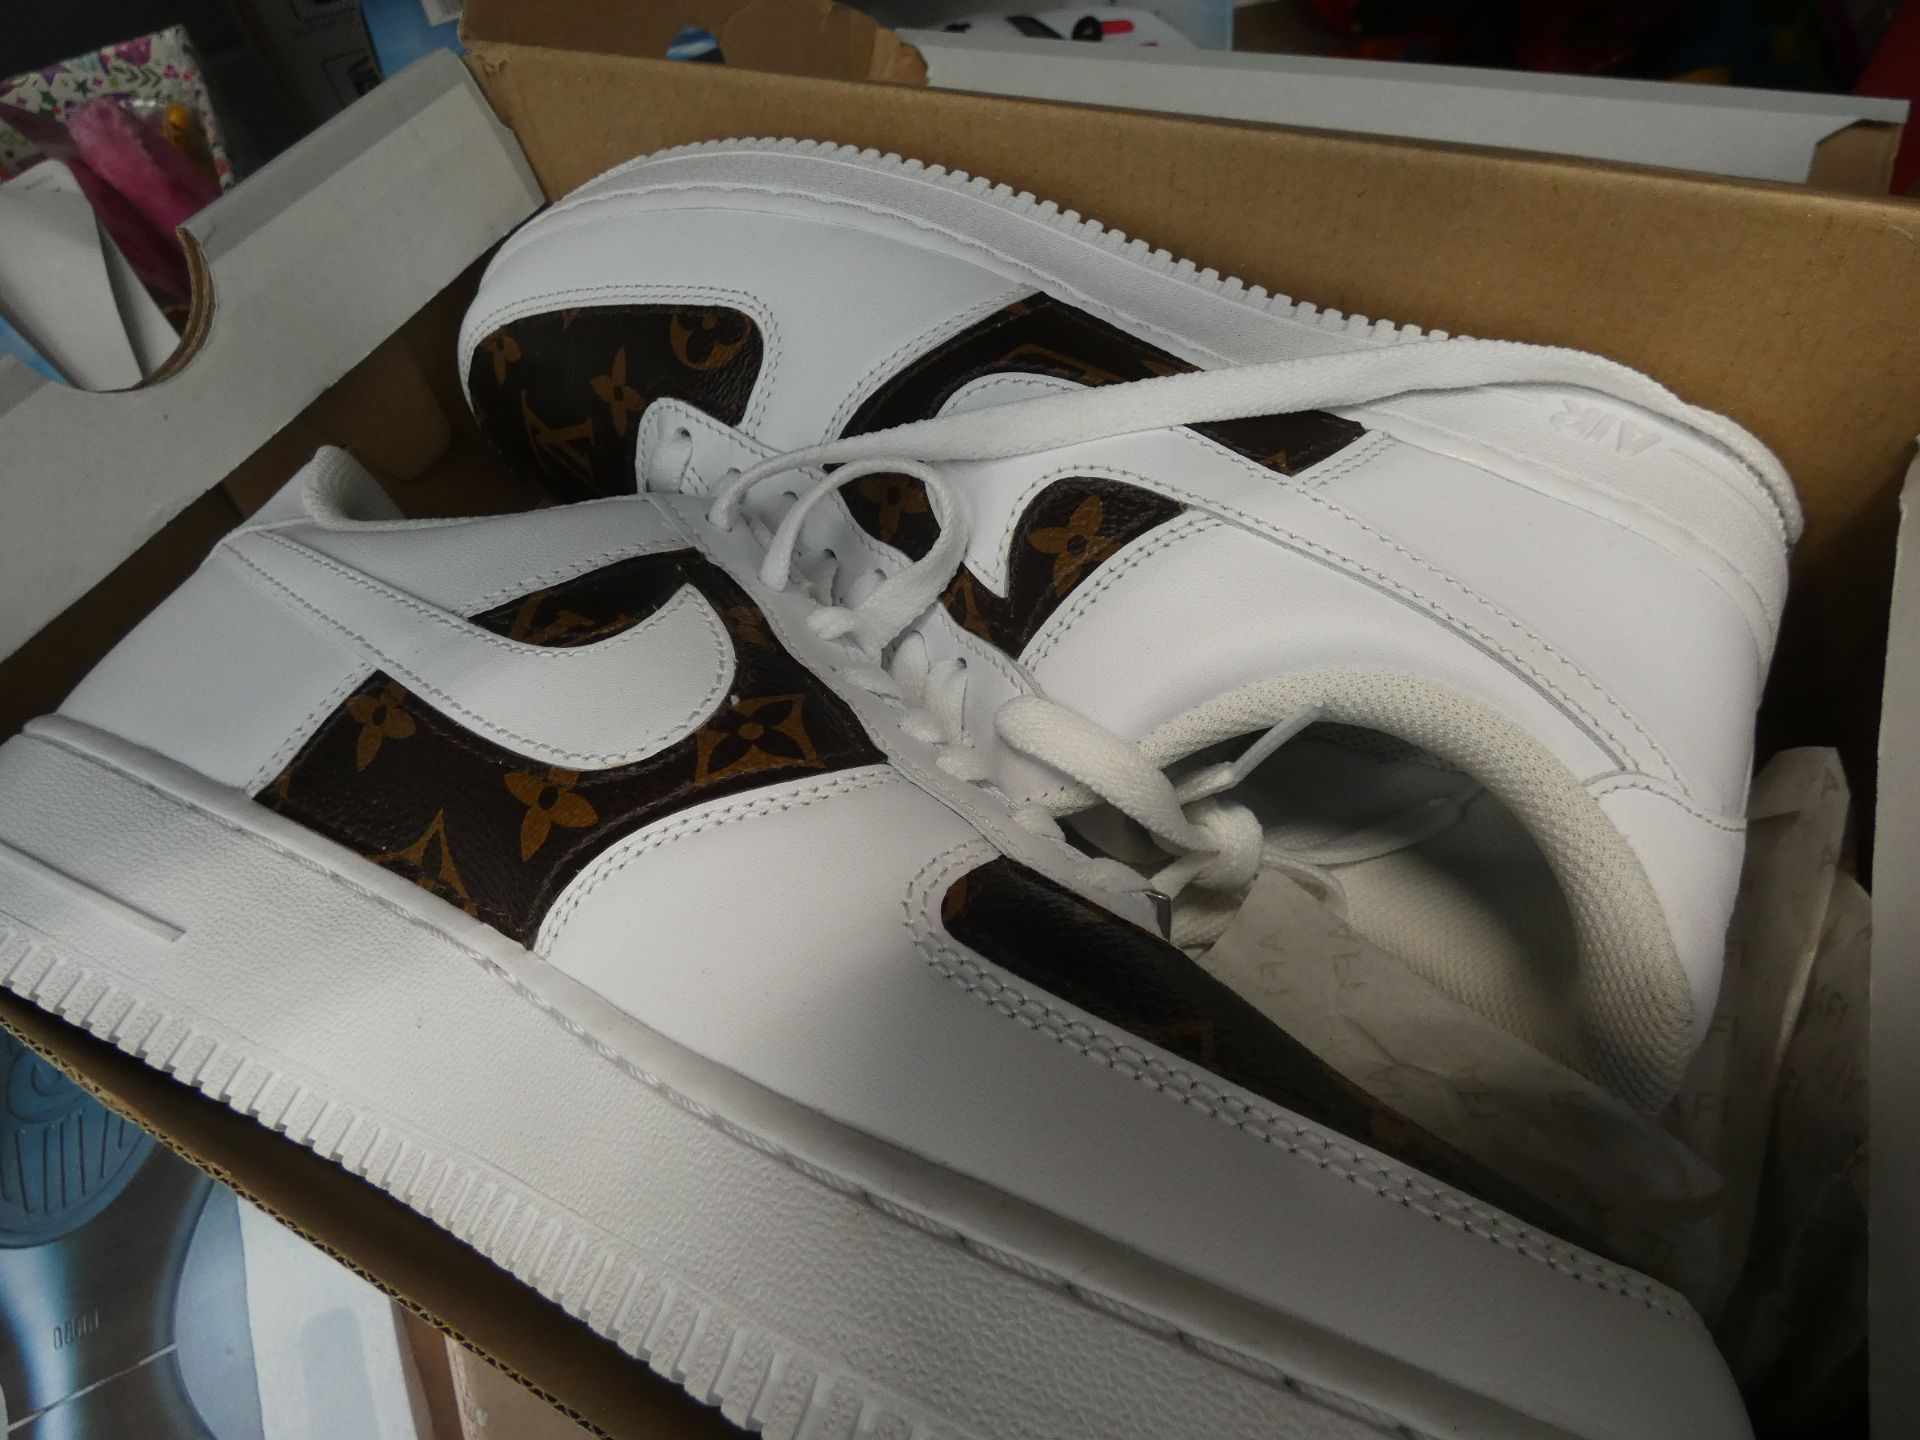 Boxed pair of Nike Air Force One trainers, size 7.5